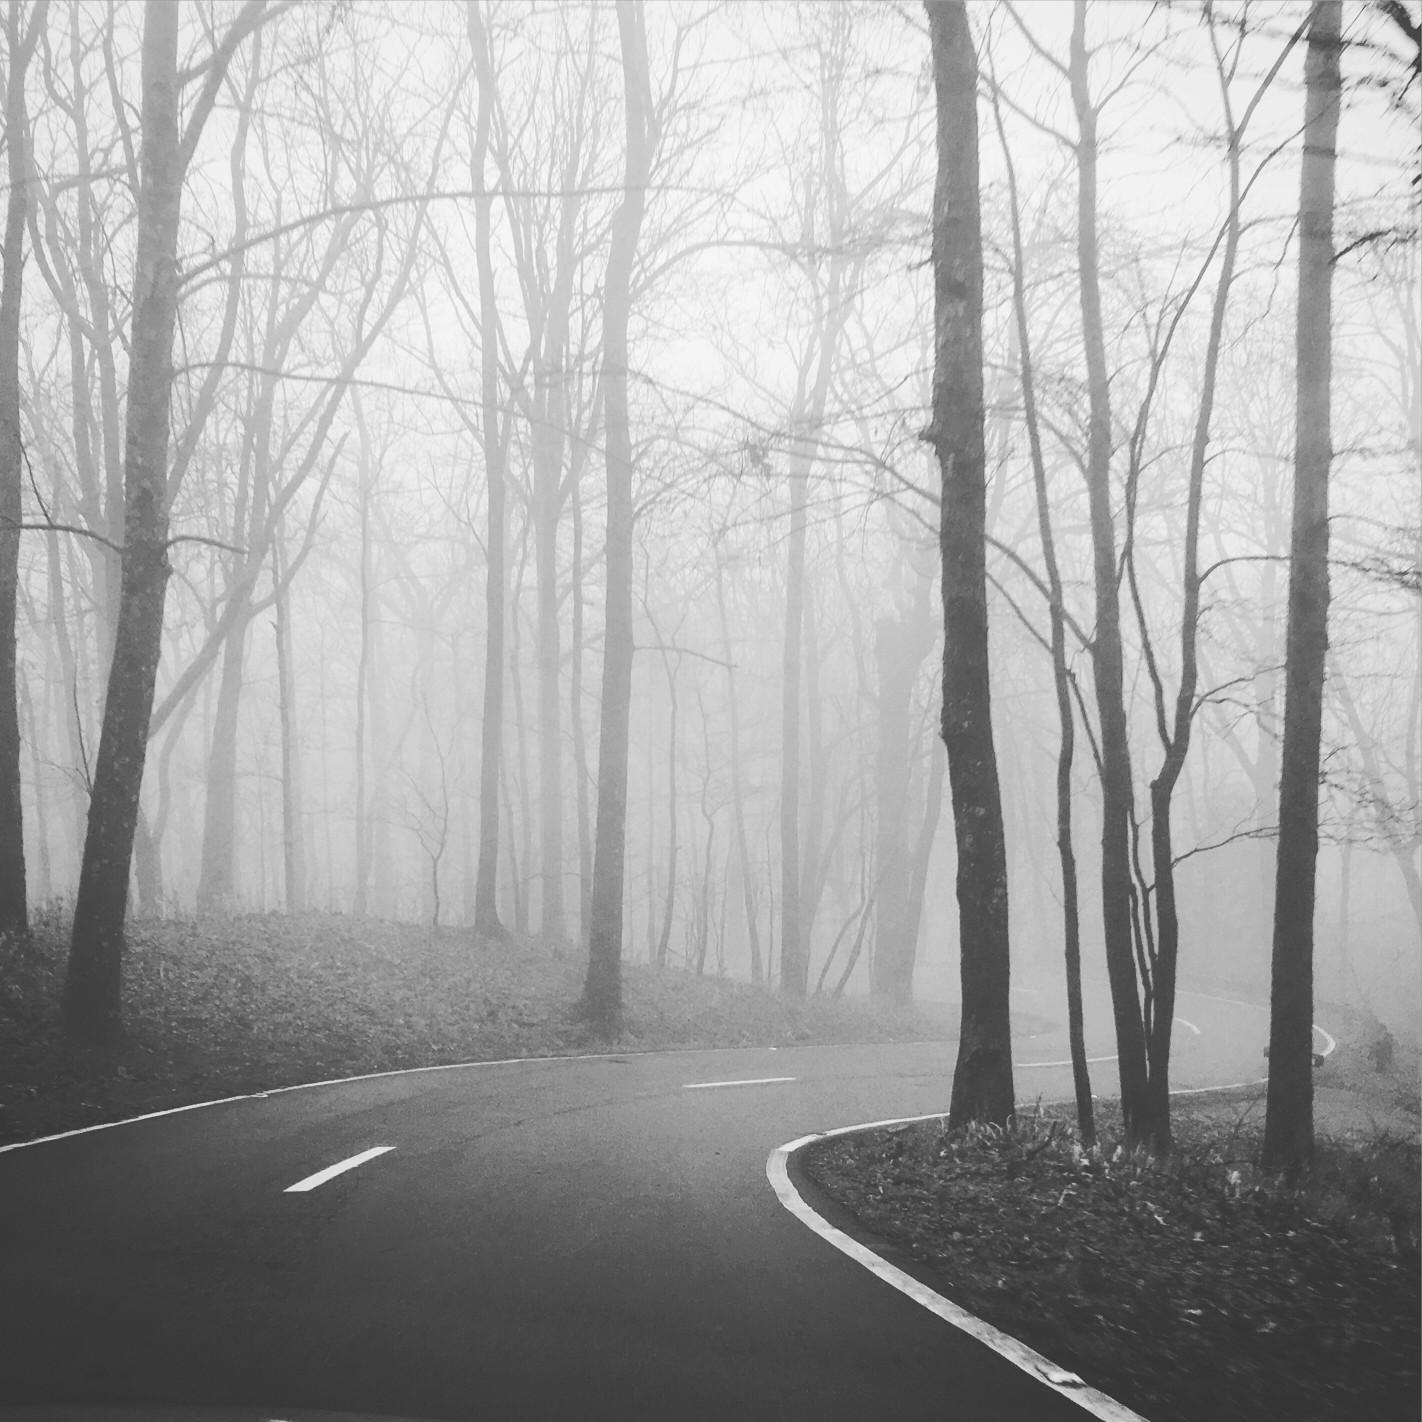 An empty road curving through foggy woods.